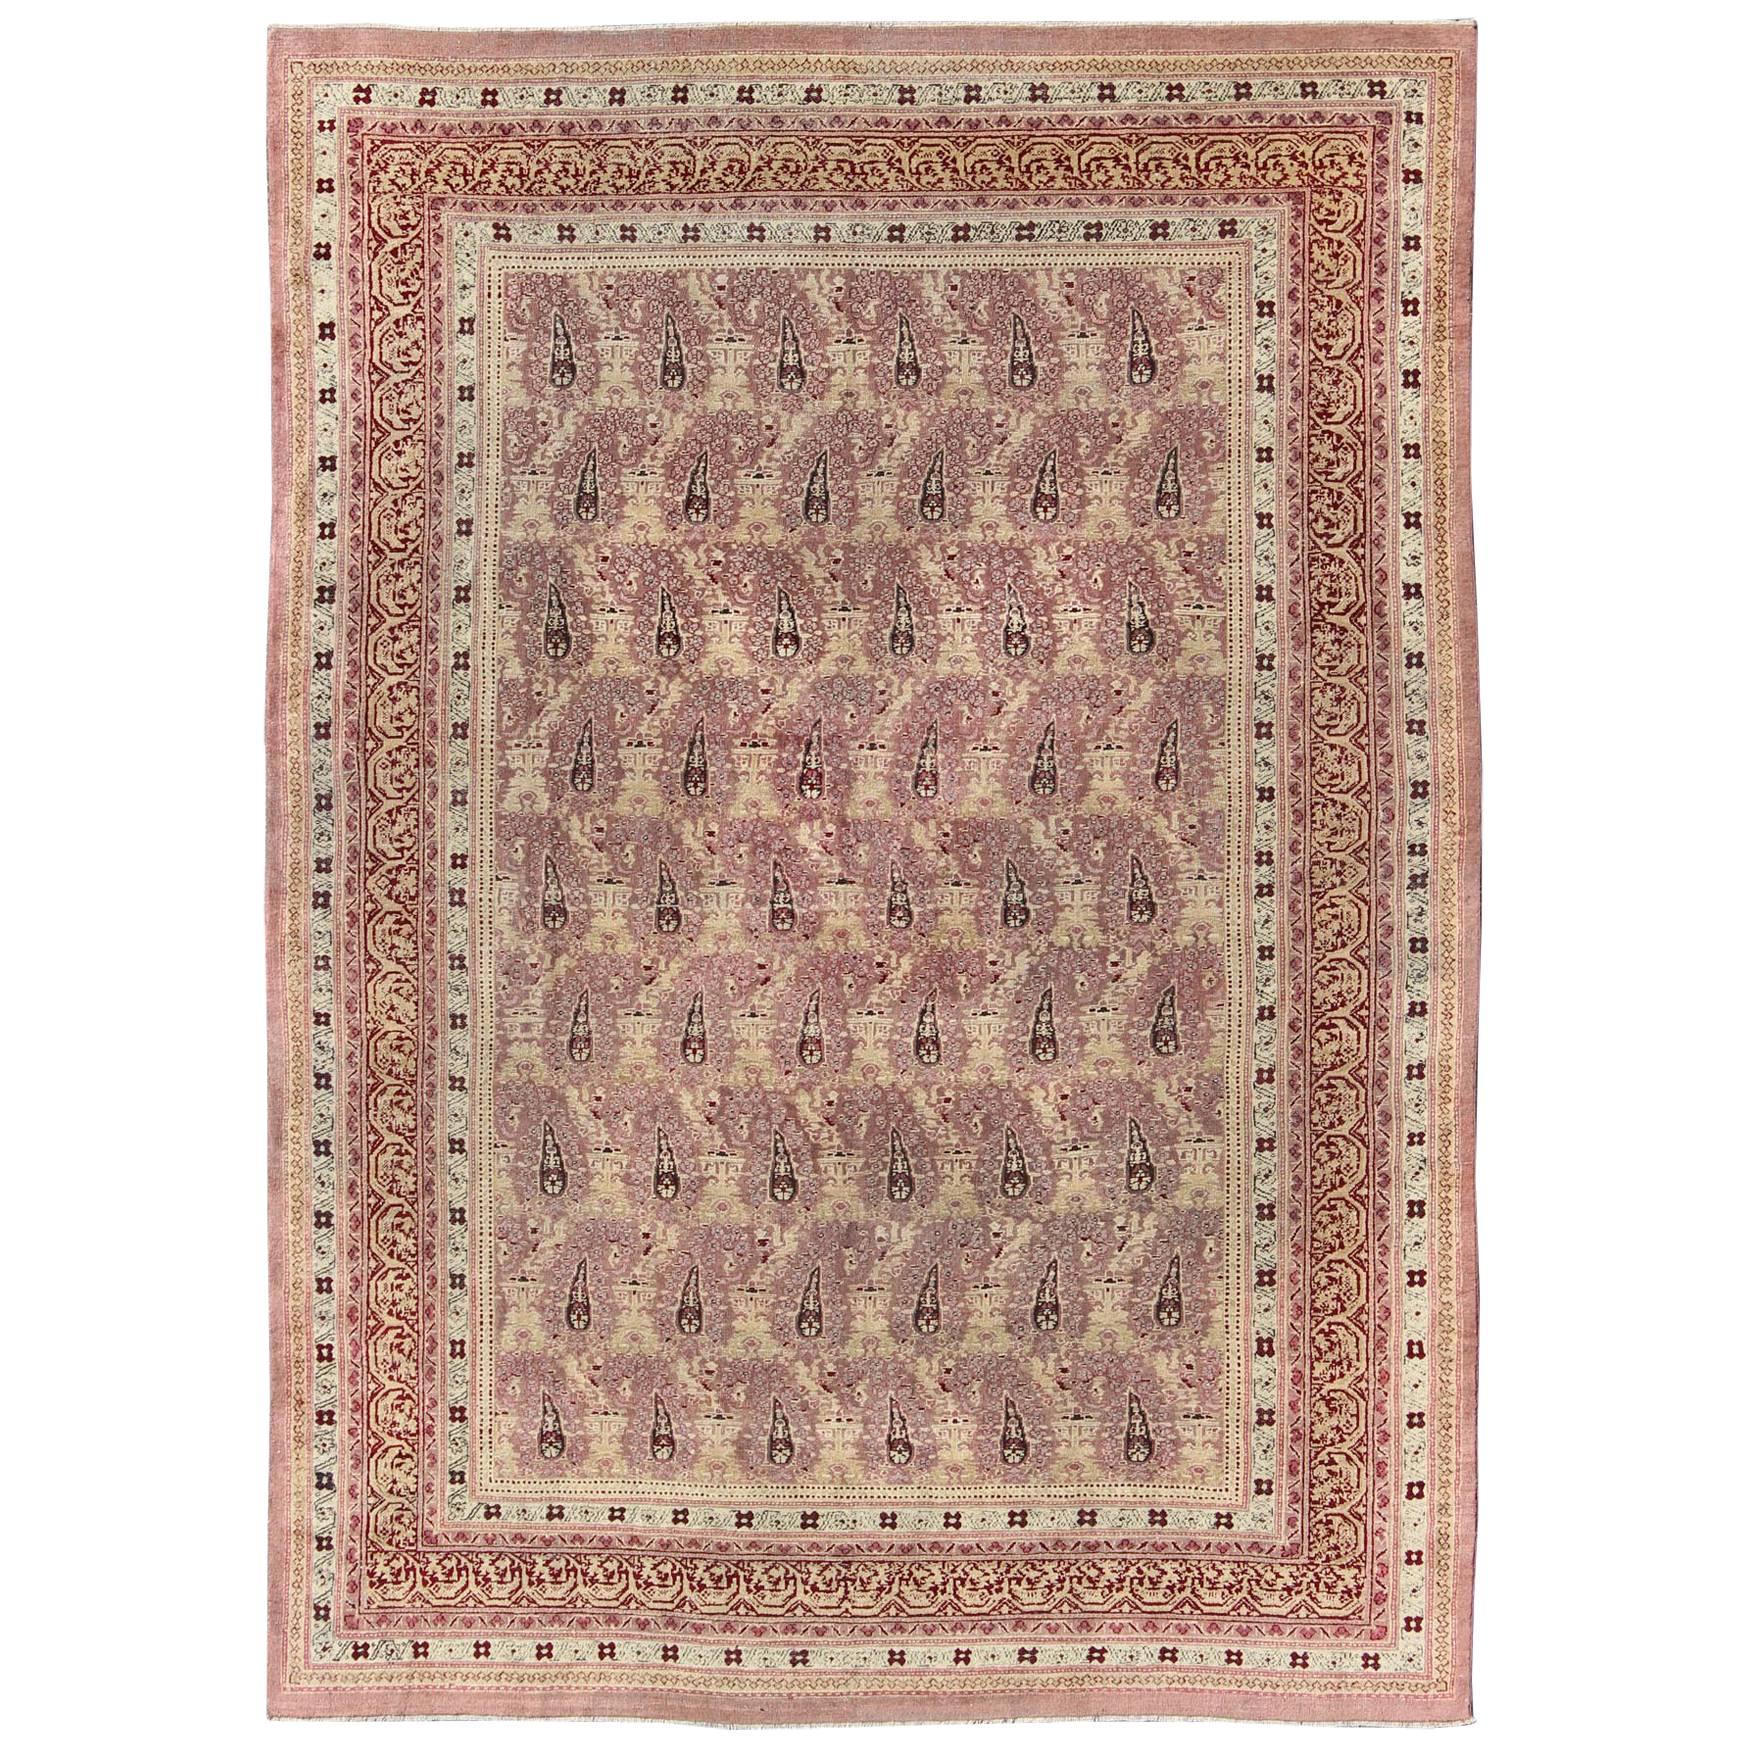 Antique Amritsar Rug with Paisley Pattern in, Lavender, Purple, Pink & Yellow